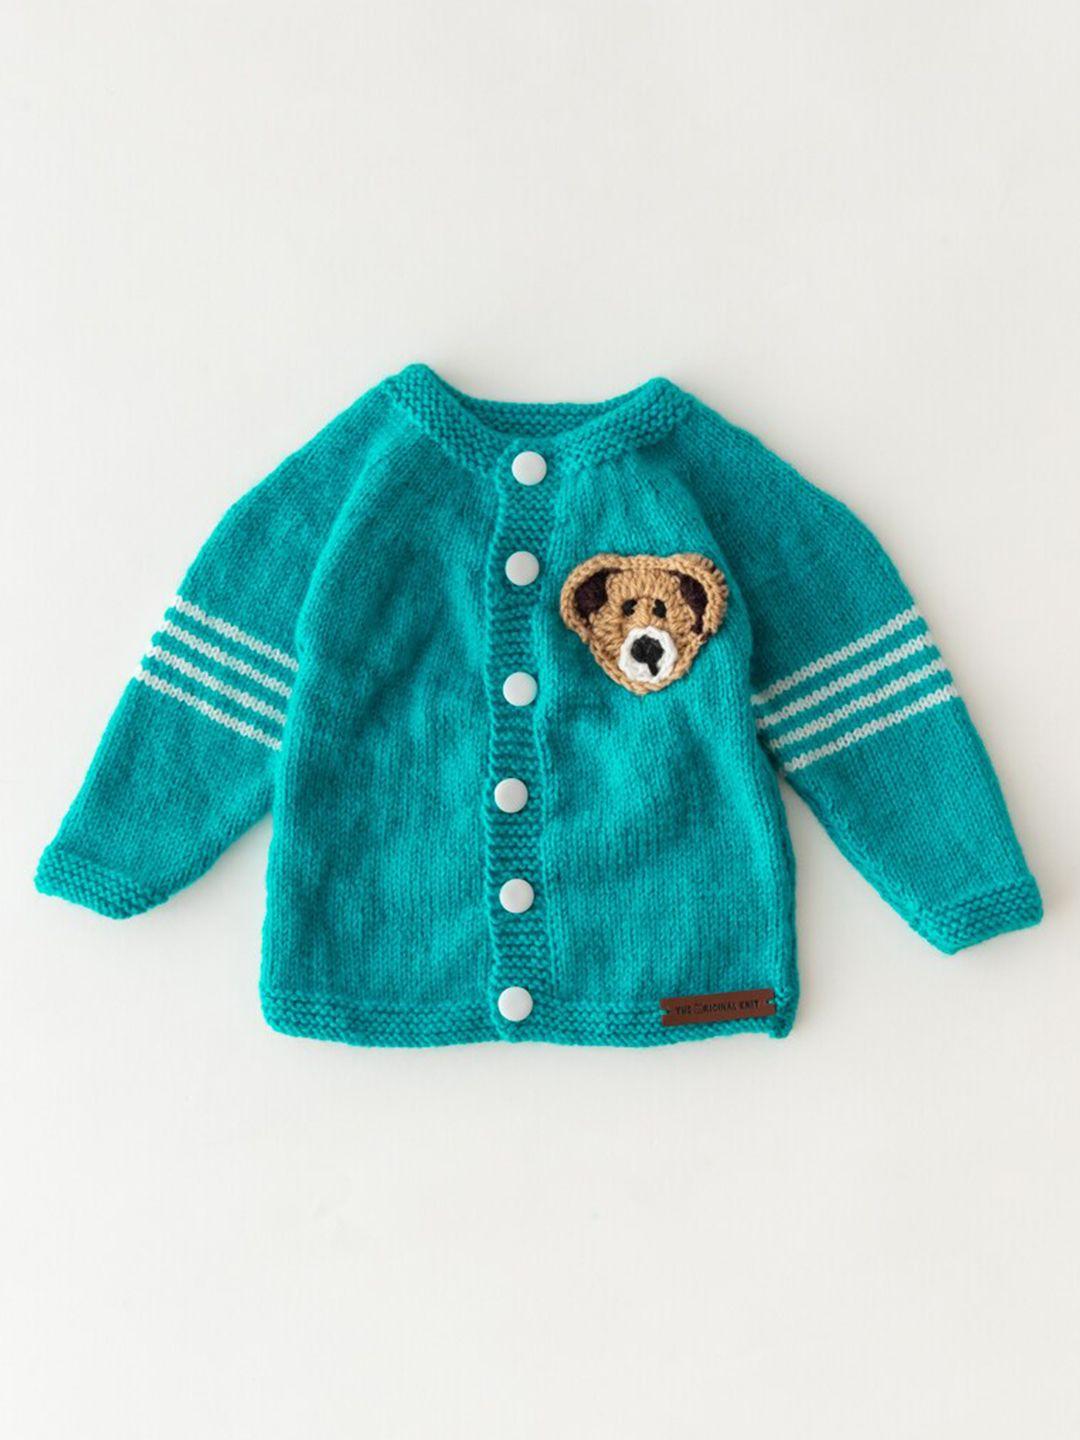 the original knit unisex kids turquoise blue & white embroidered